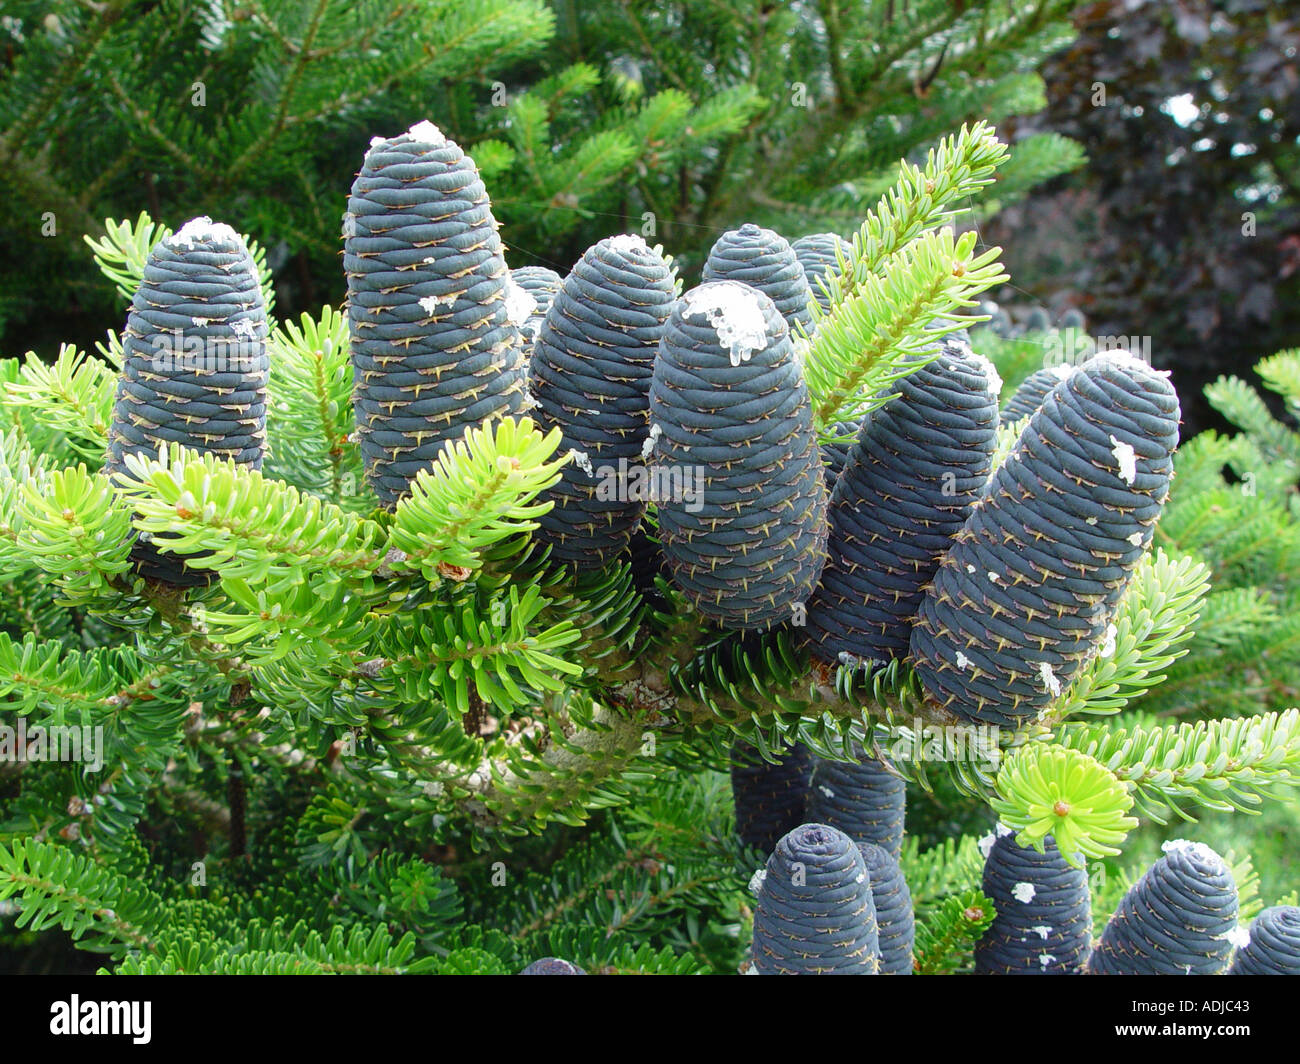 Abies koreana Conifer with blue cones Stock Photo